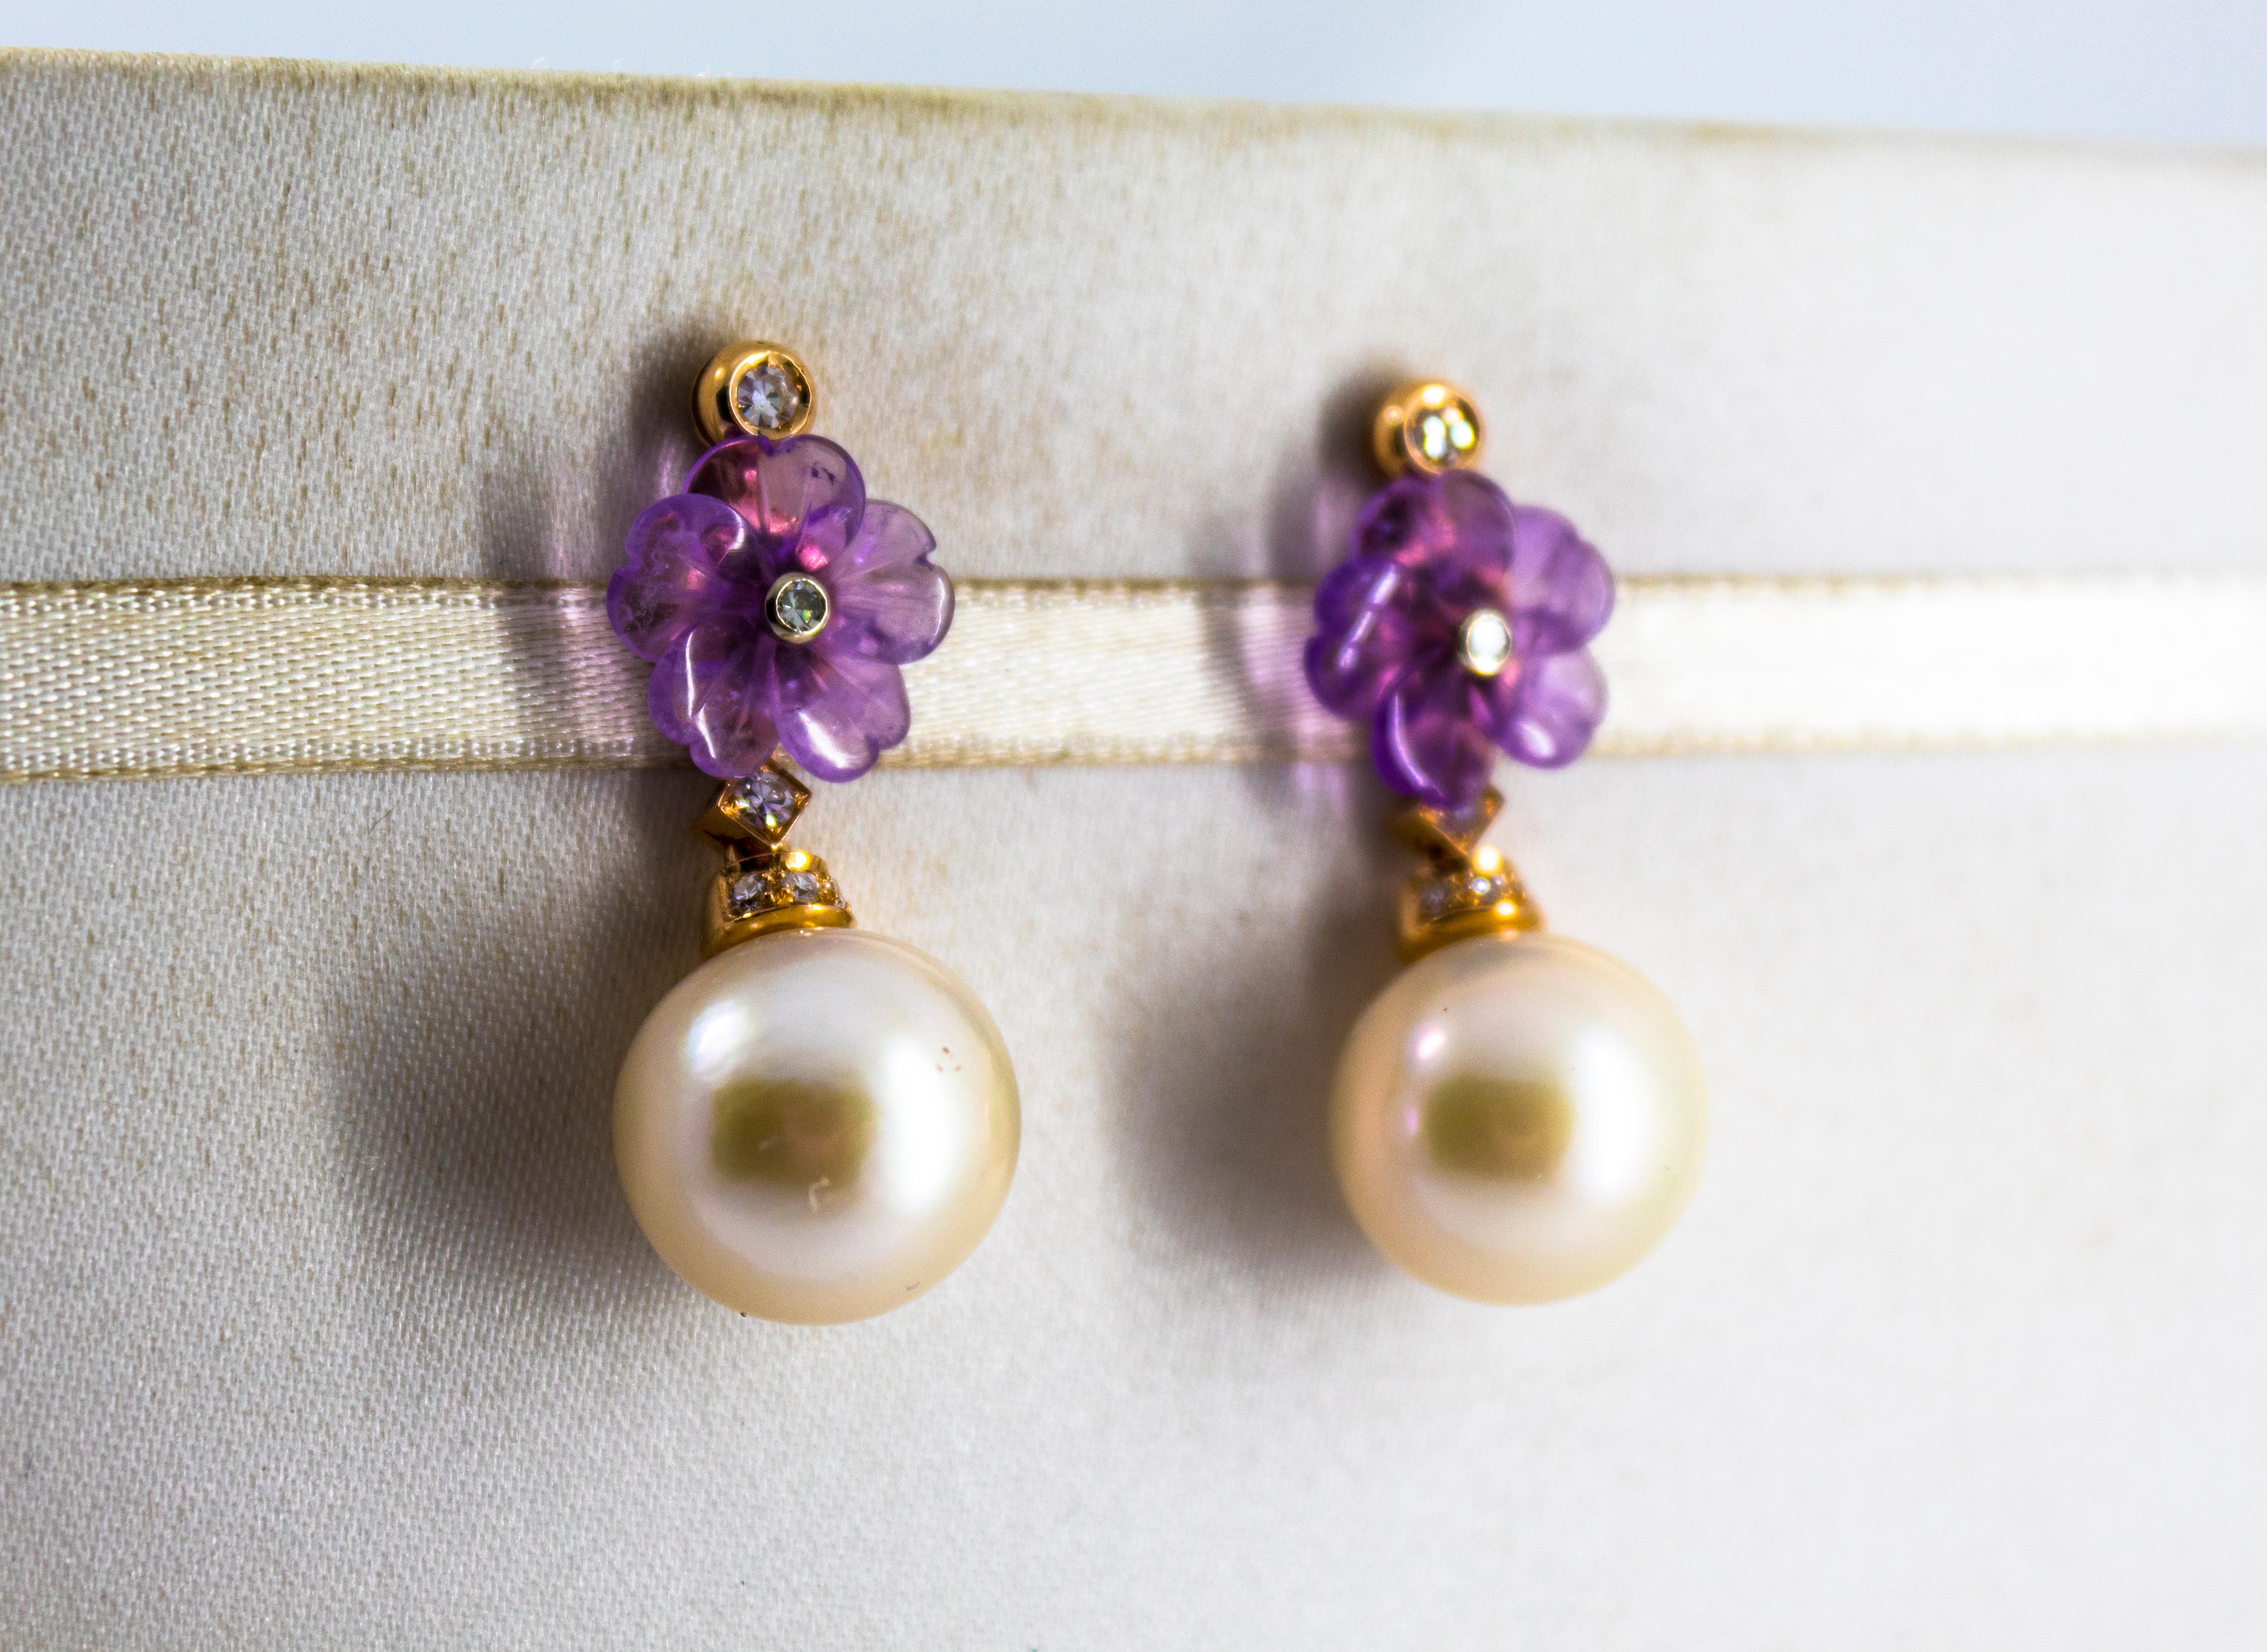 These Stud Earrings are made of 14K Yellow Gold.
These Earrings have 0.20 Carats of White Brilliant Cut Diamonds.
These Earrings have also 35.00 Carats of Pearls and Amethyst.
These Earrings are available also with Green Flowers made of Agate or